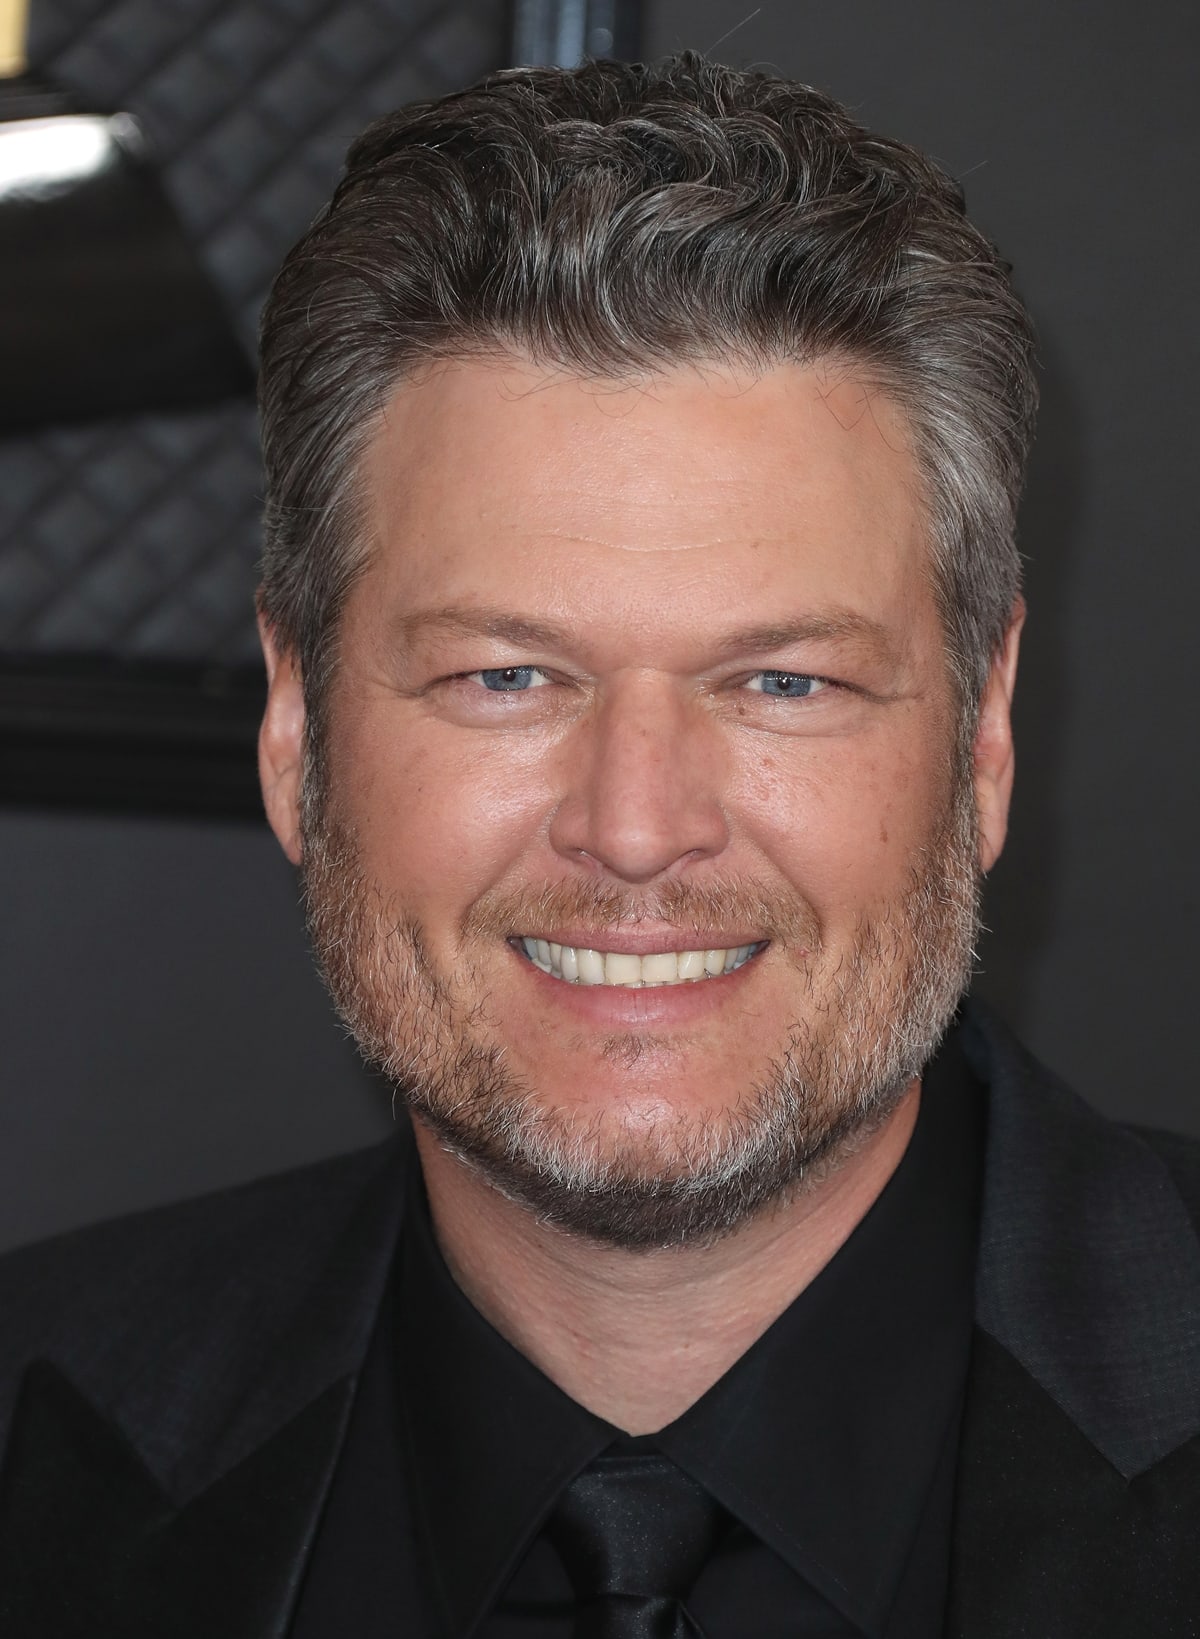 Blake Shelton has been married three times but does not have biological children of his own